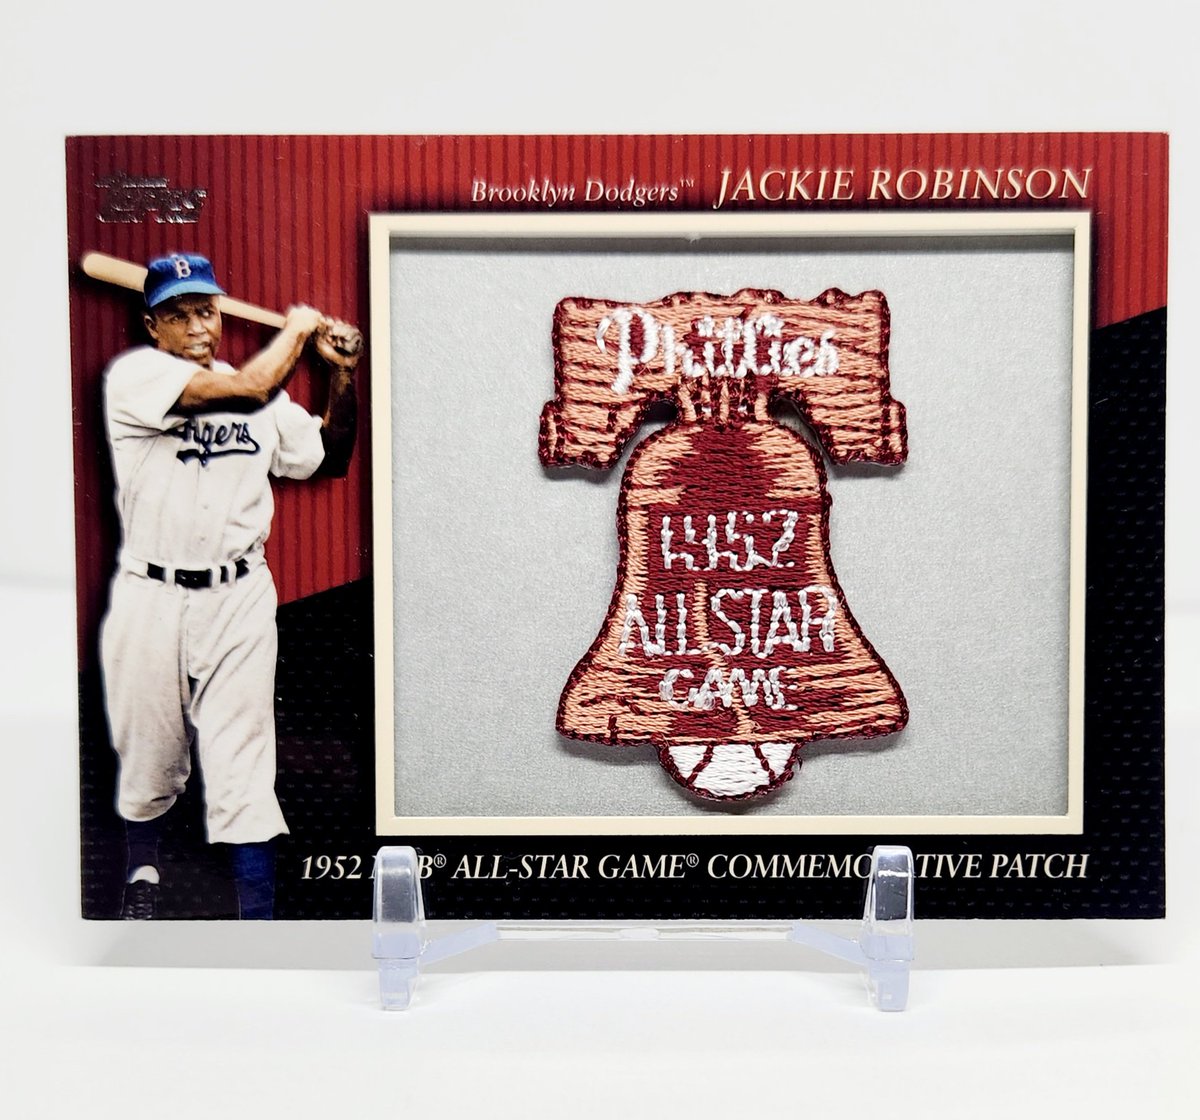 Continuing my April #JackieRobinson card posts with this 2010 Topps Baseball Series 2 Commemorative Patch card. #thehobby ⚾️